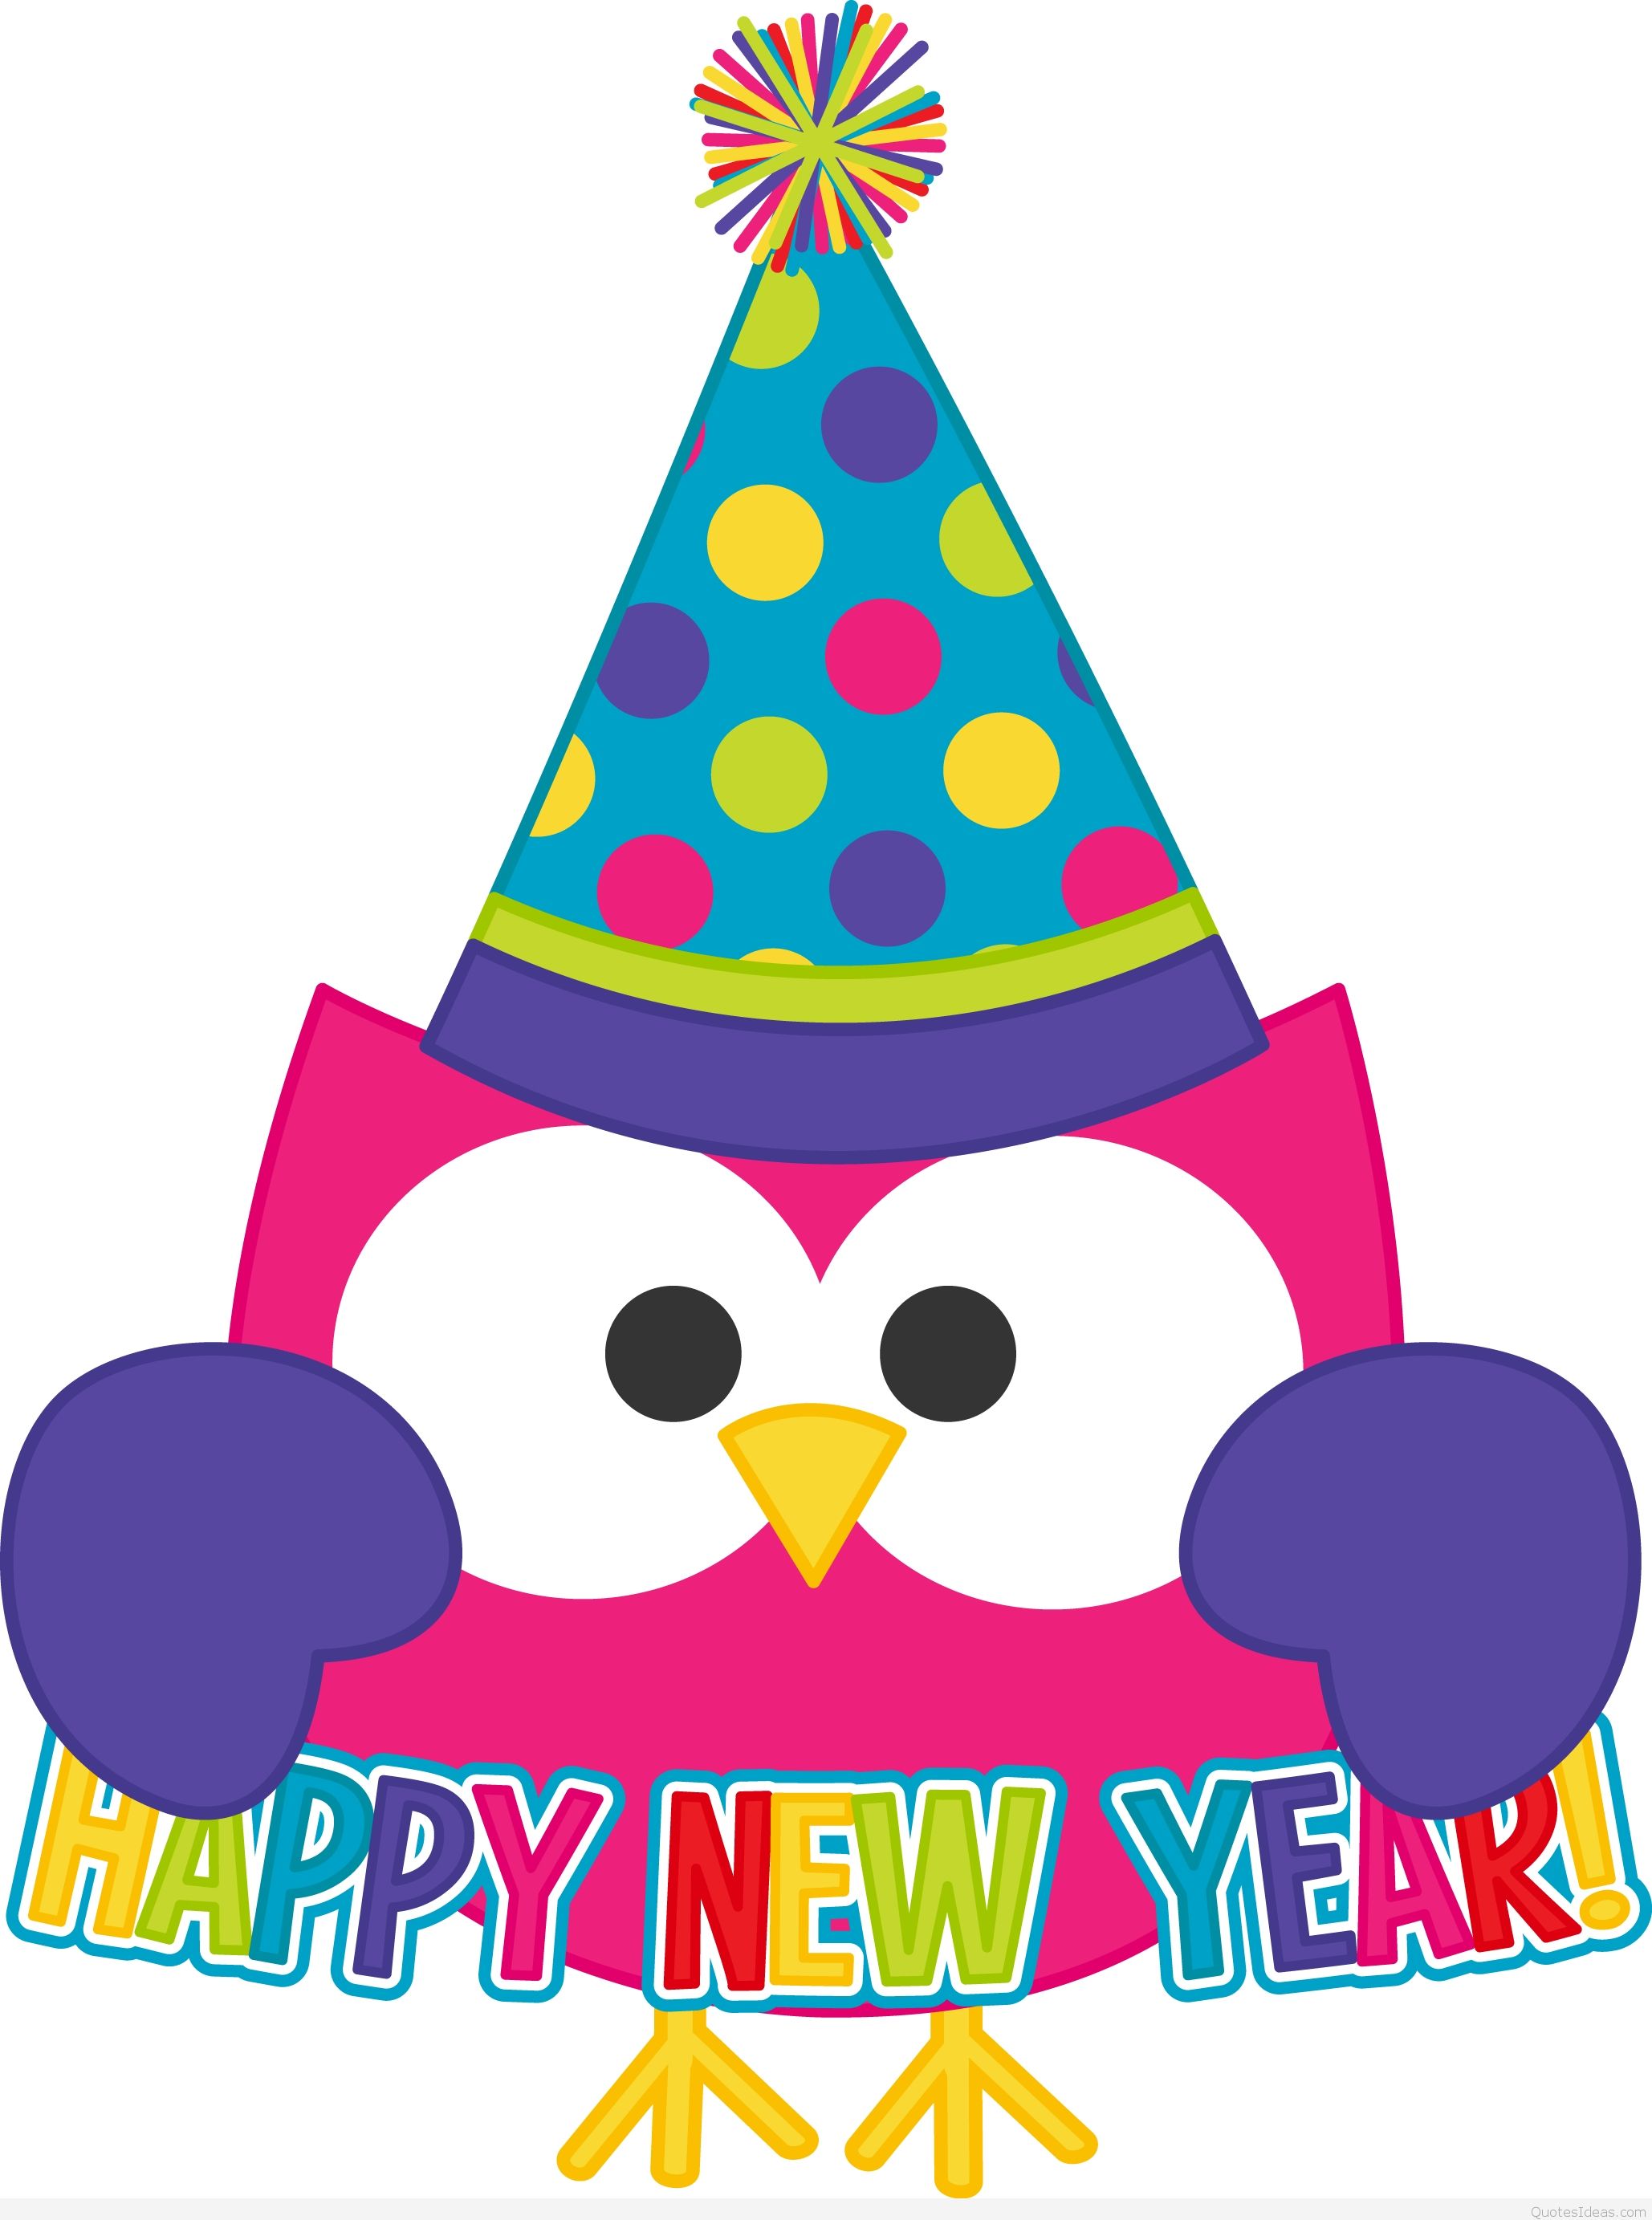 Happy new year free clip art wallpapers